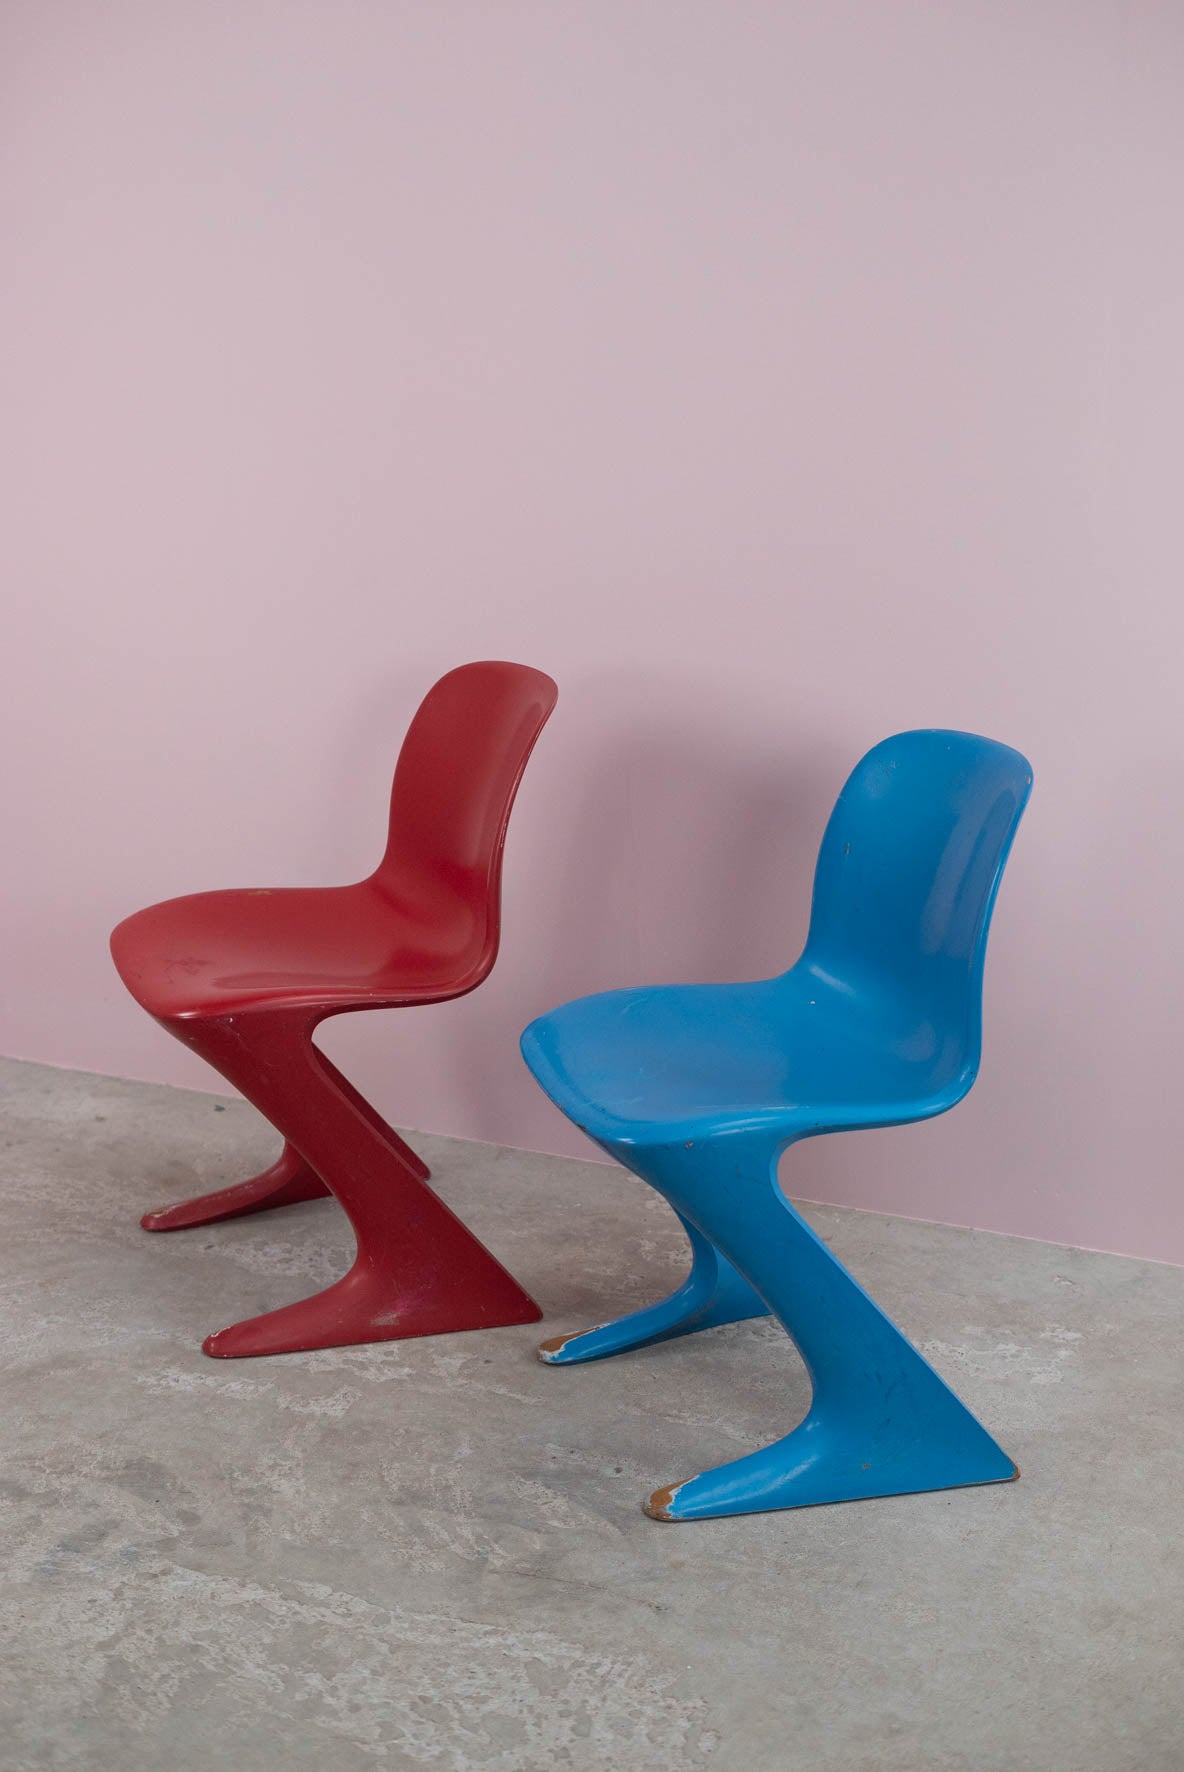 Set of 6 Z-Chairs by Ernst Moeckl and Siegfried Mehl for Horn Germany produced by VEB Petrochemisches Kombinat Schwedt